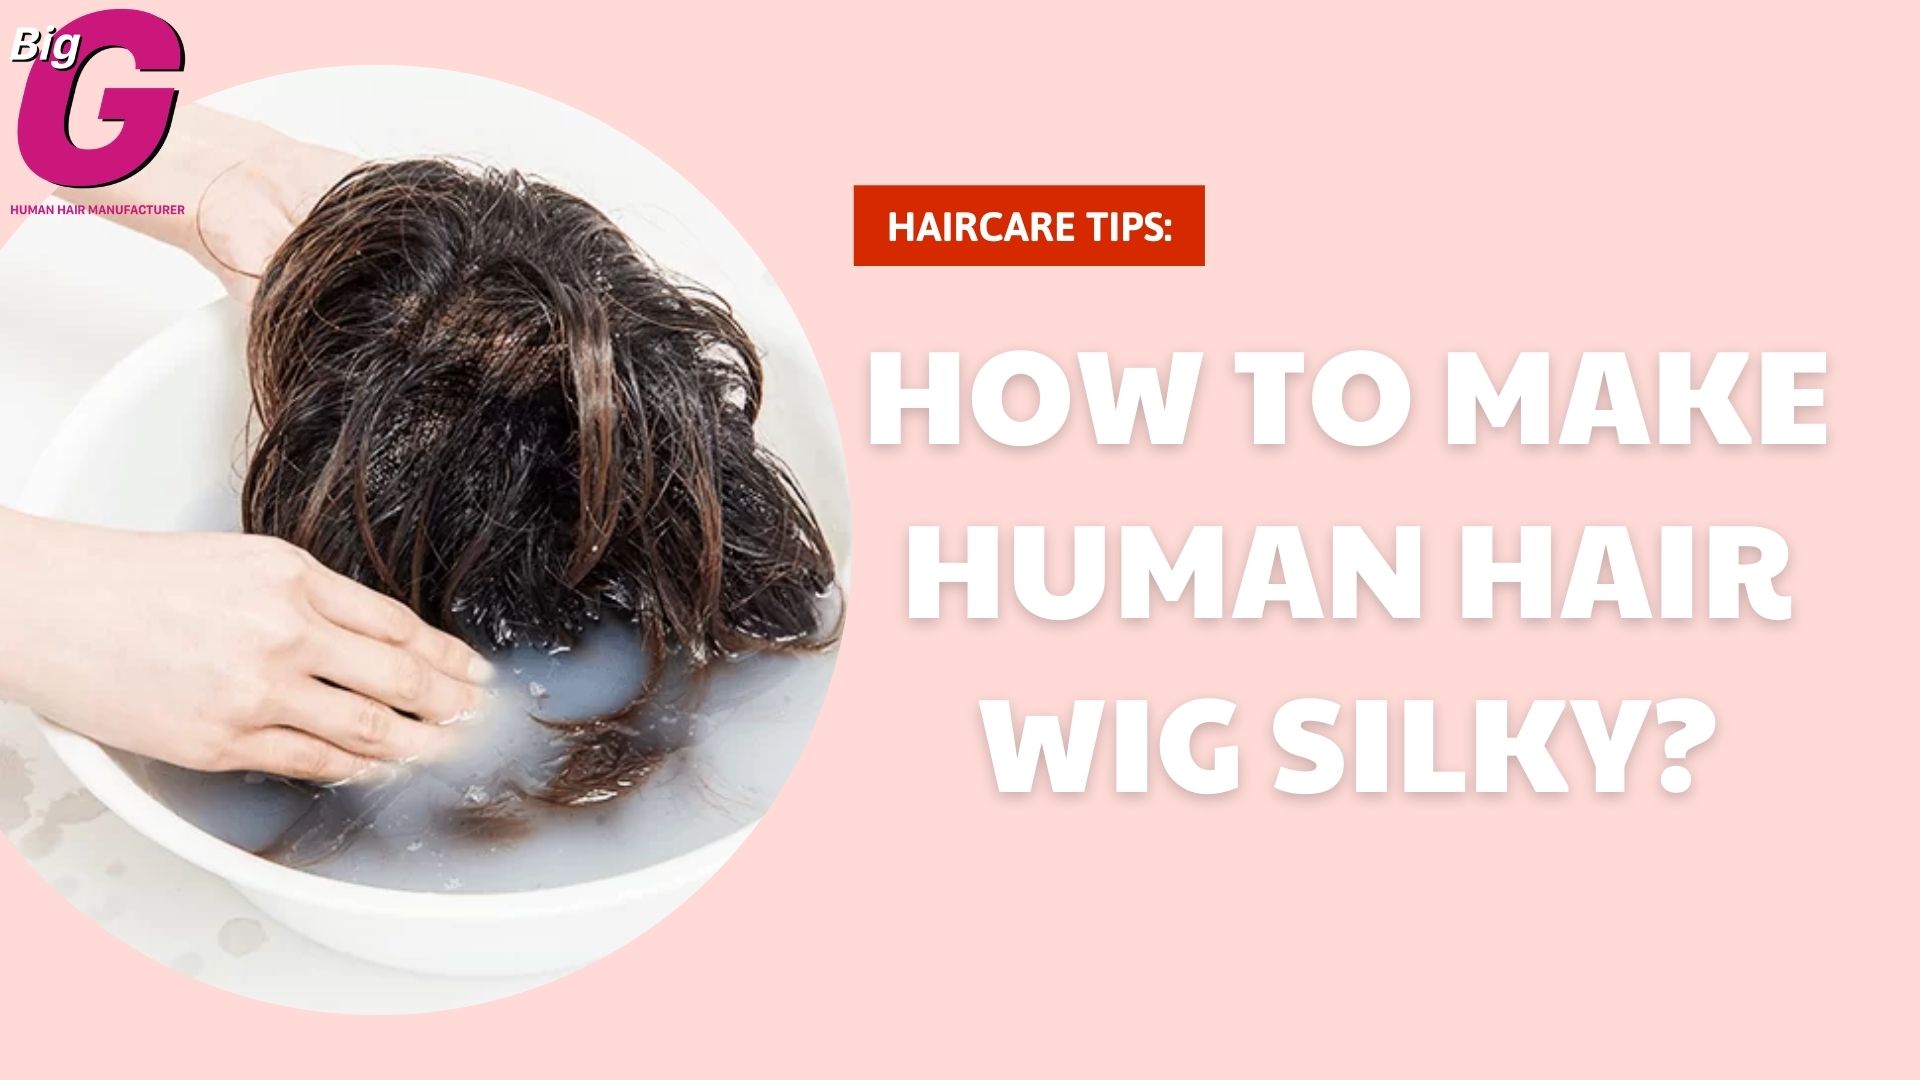 7 actions tips: How to make human hair wig silky?